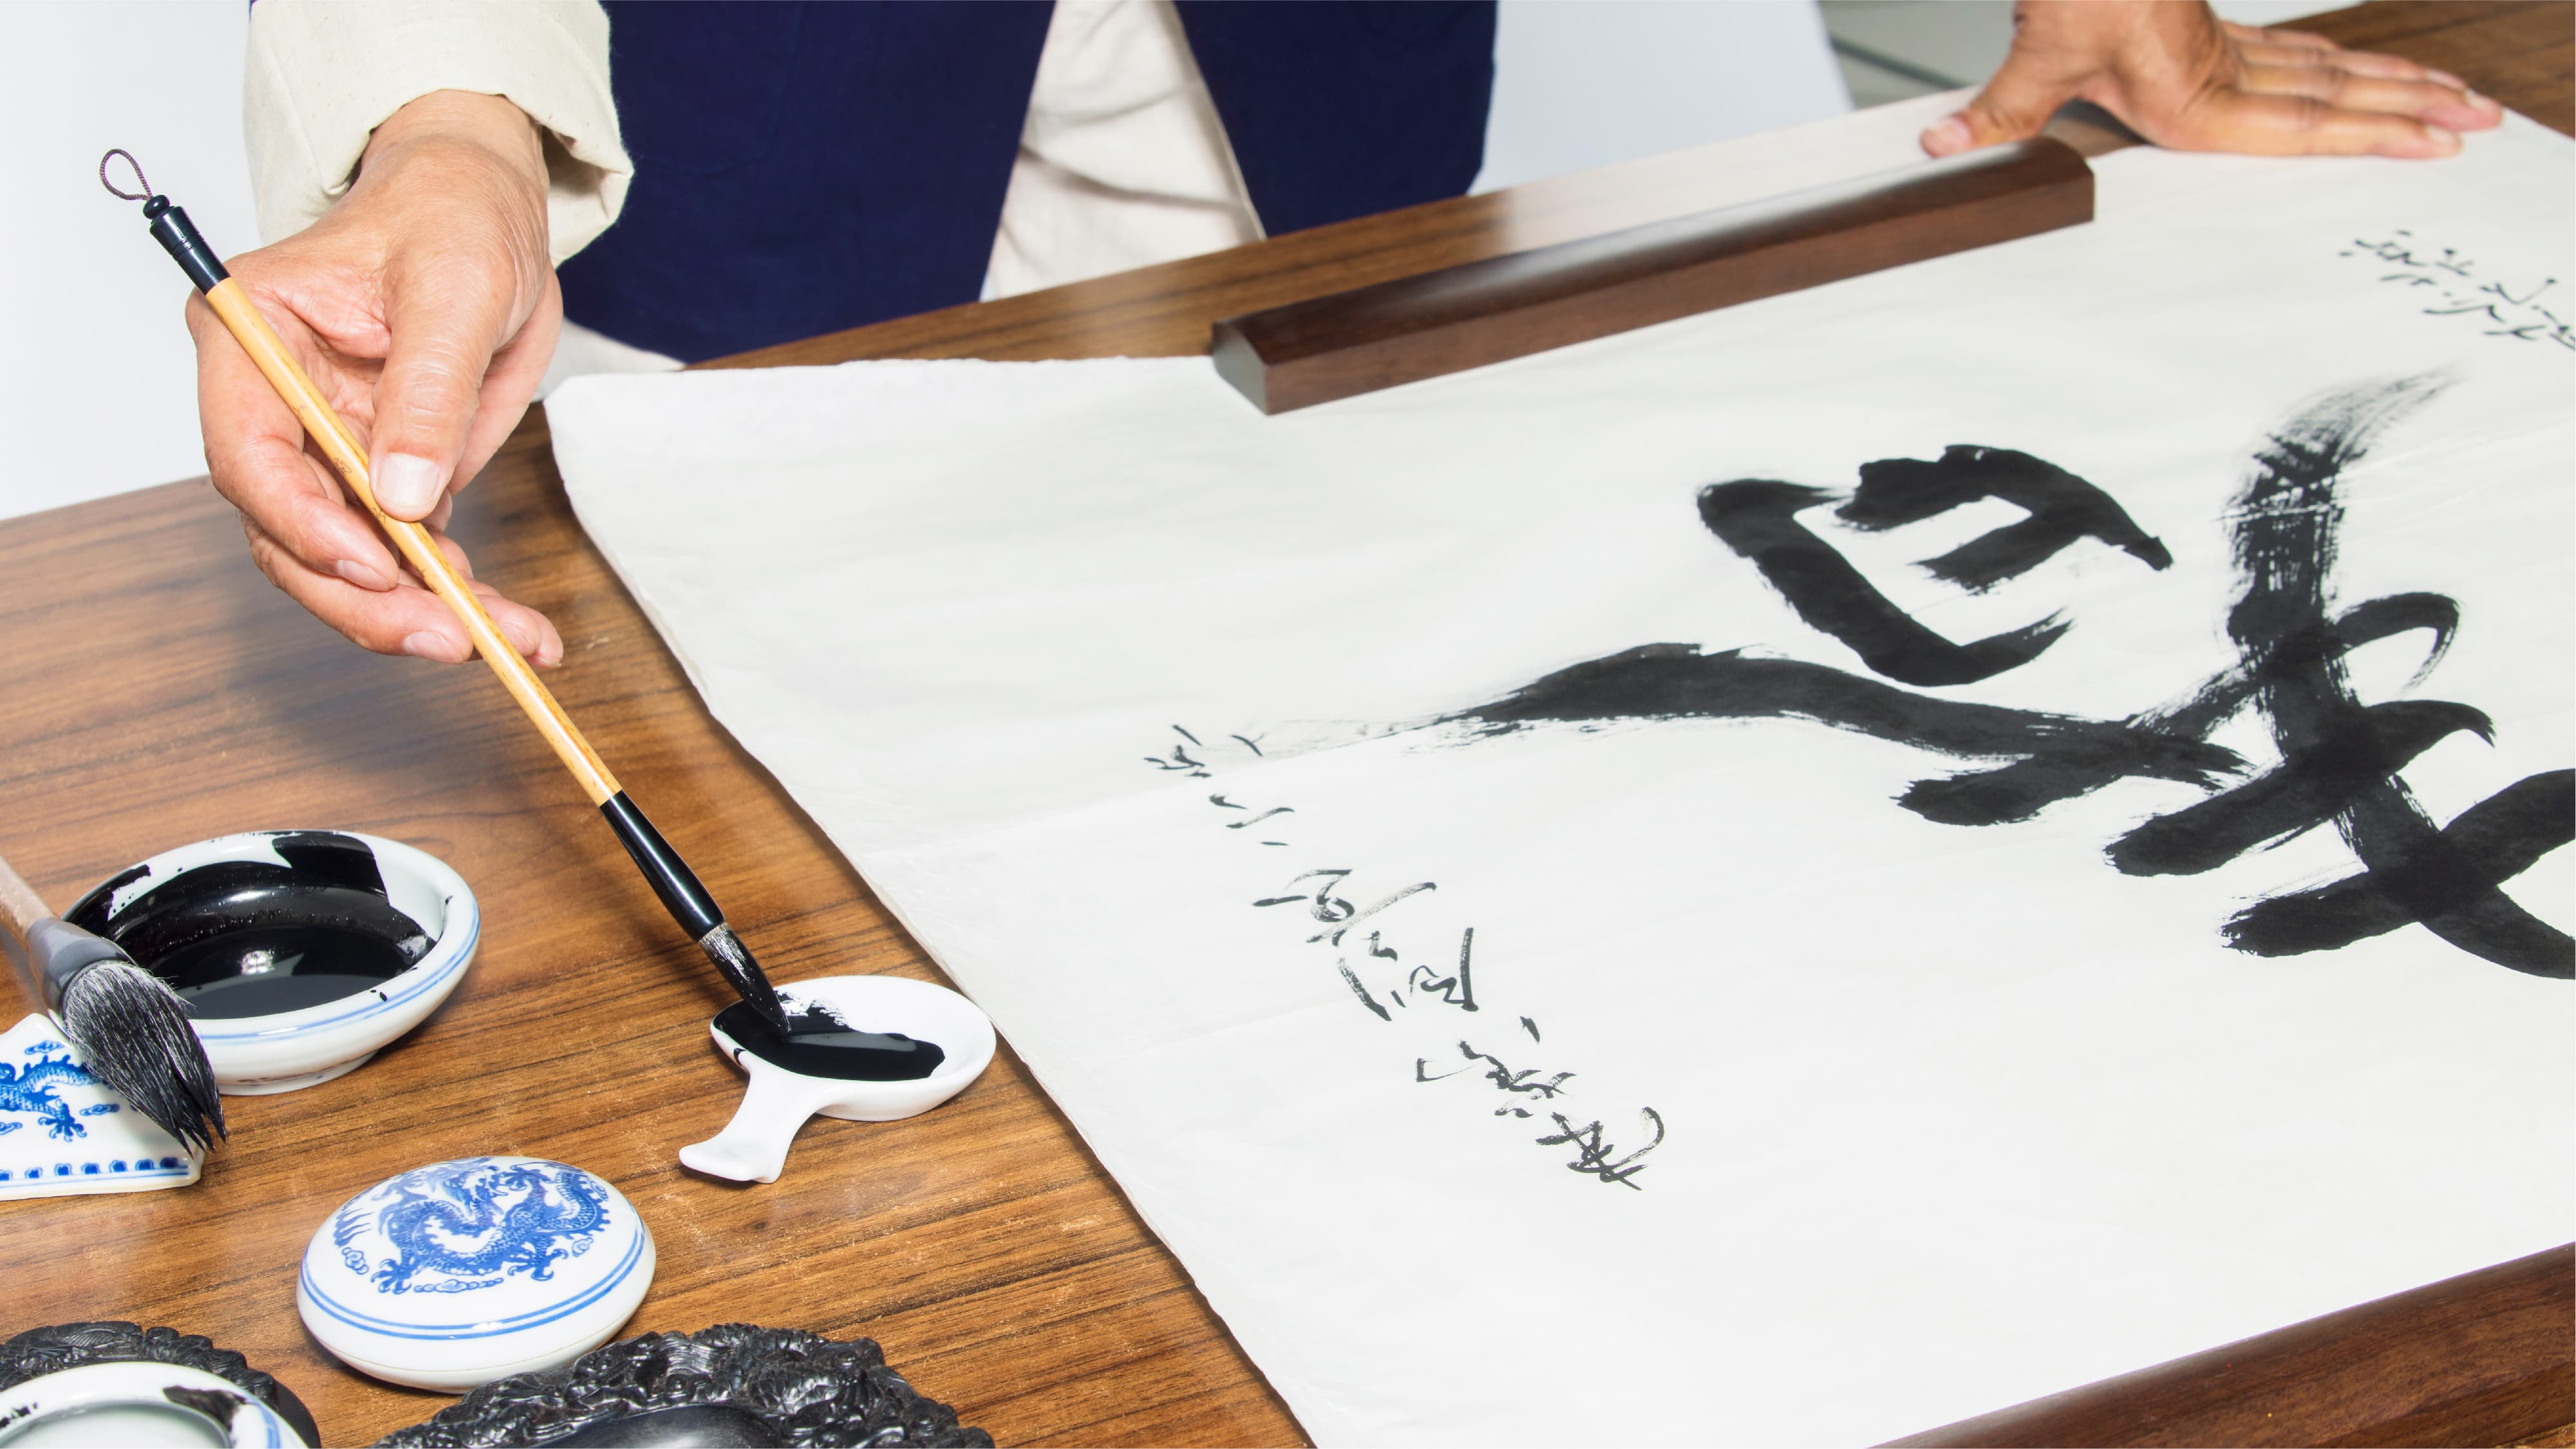 Must one read Chinese to appreciate Chinese calligraphy?, Culture News -  ThinkChina